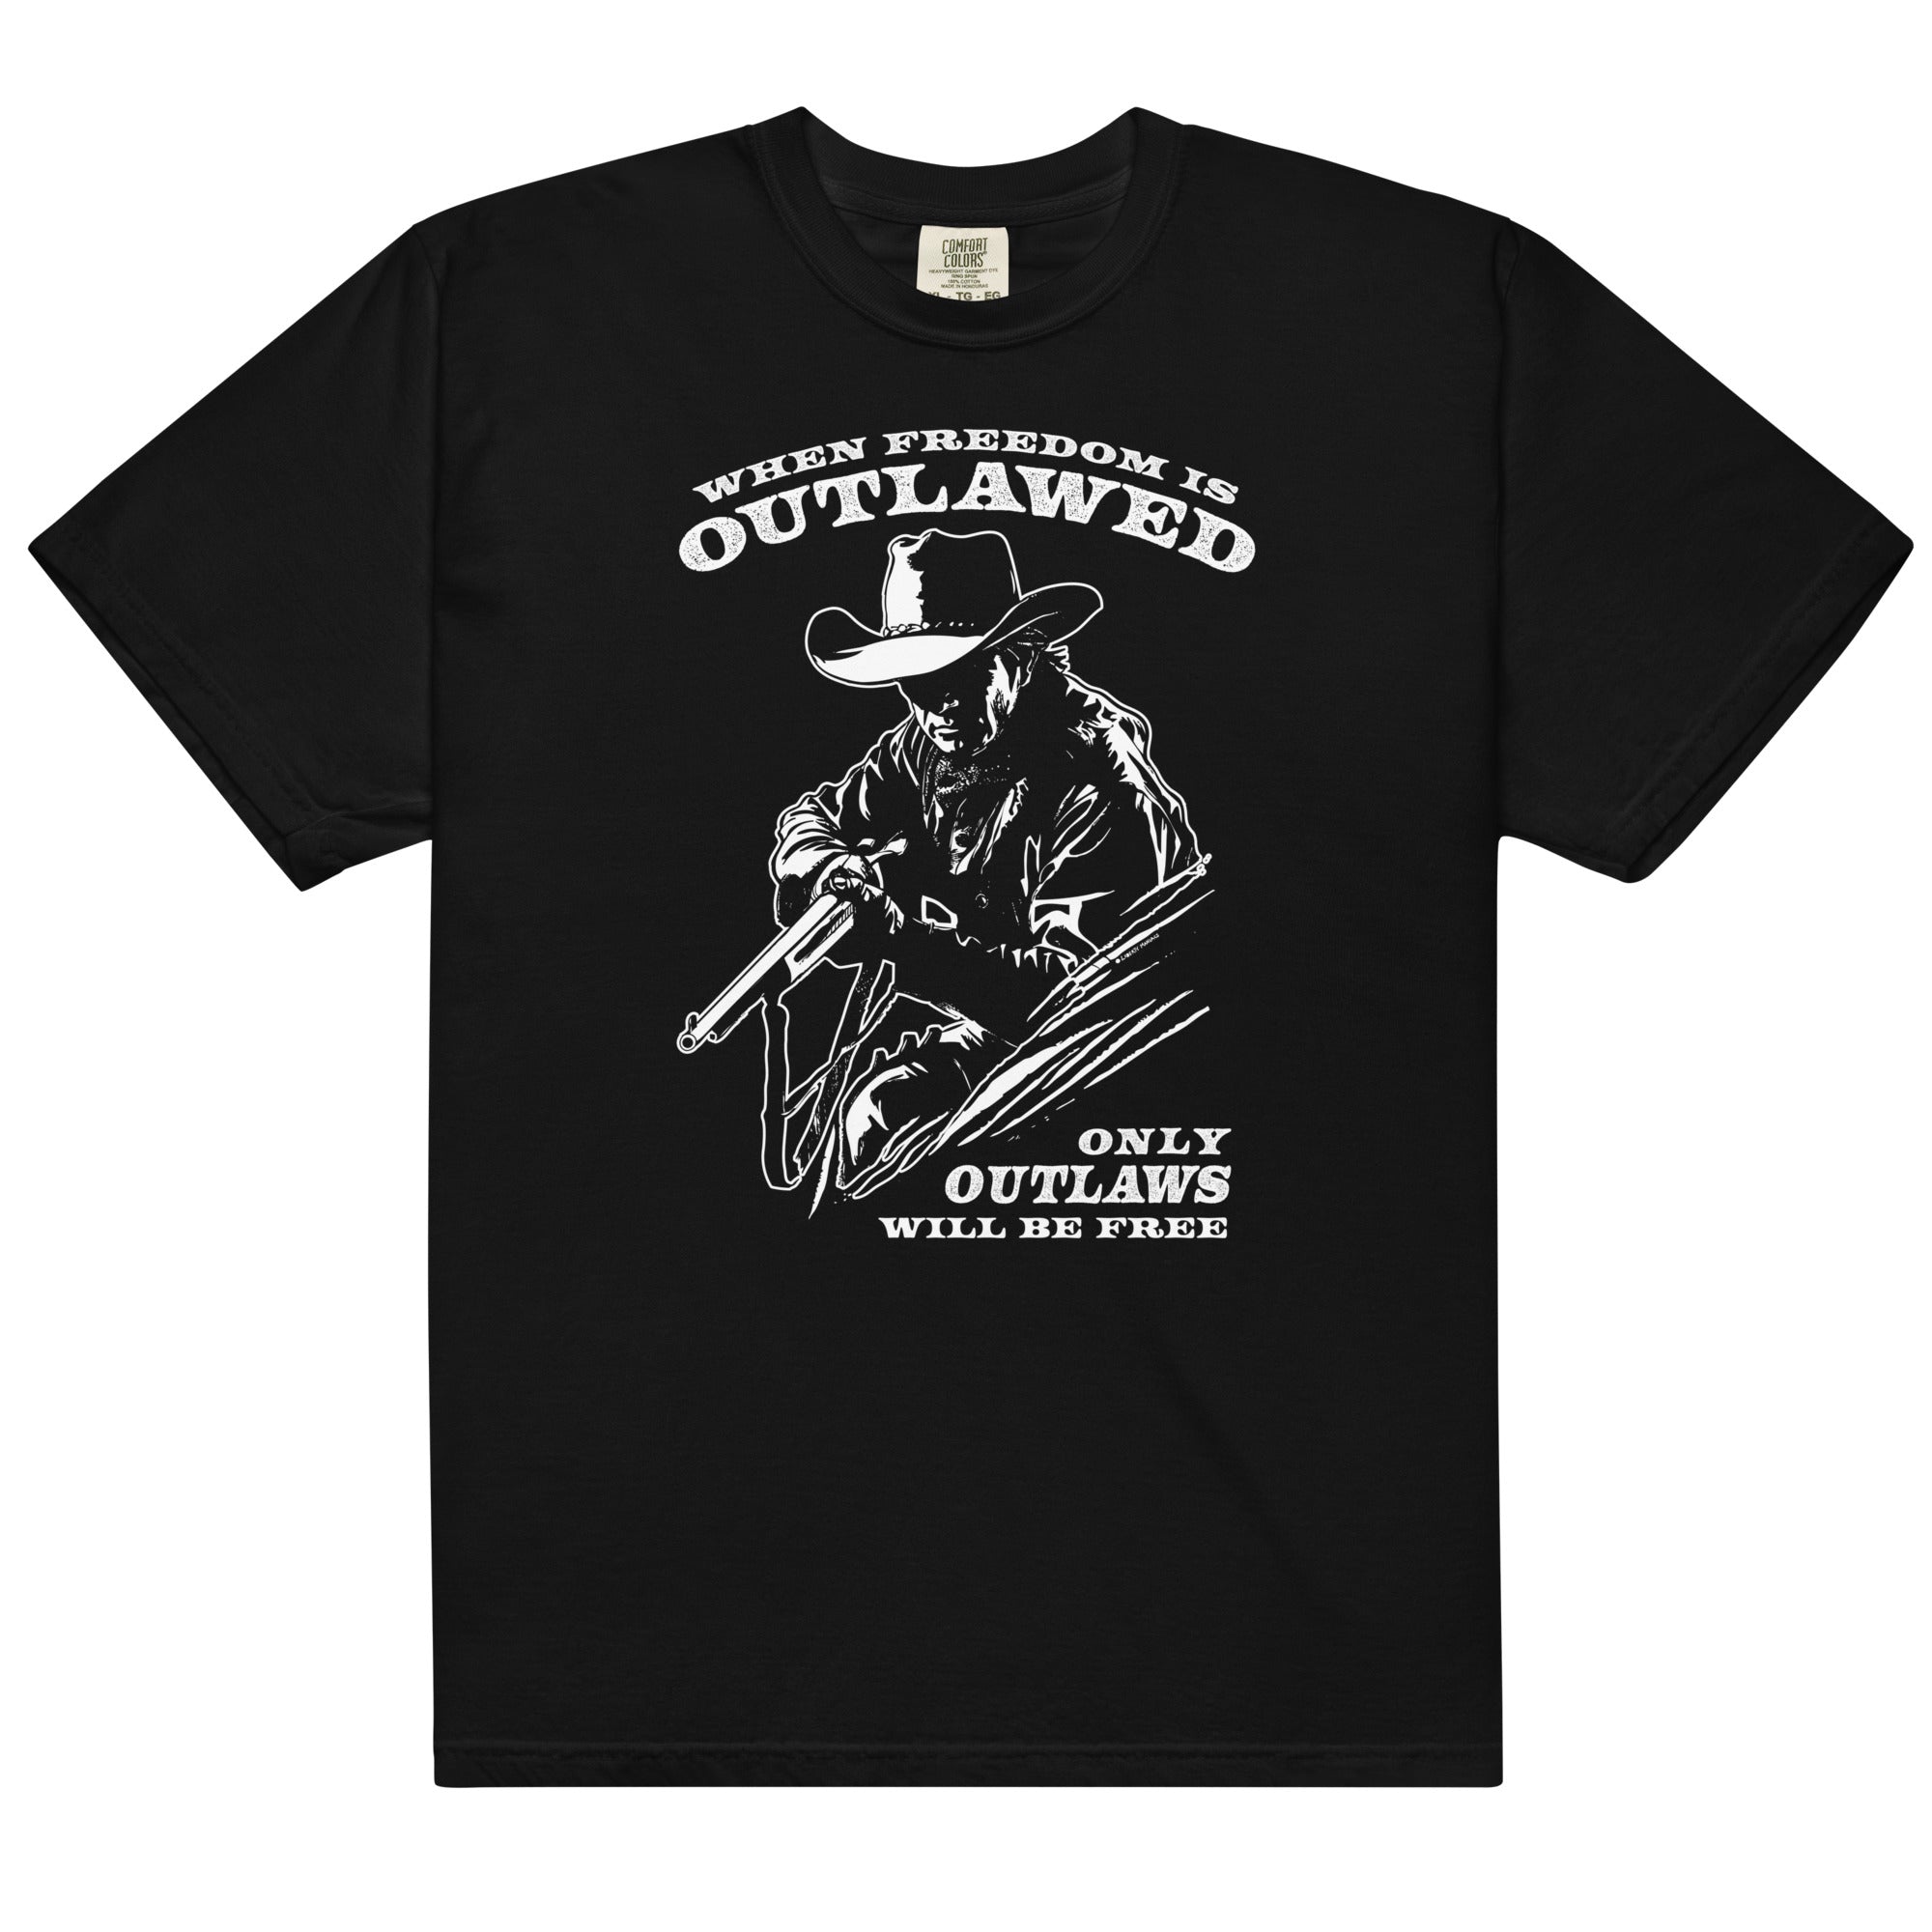 When Freedom is Outlawed Only Outlaws Will Be Free Heavyweight T-Shirt